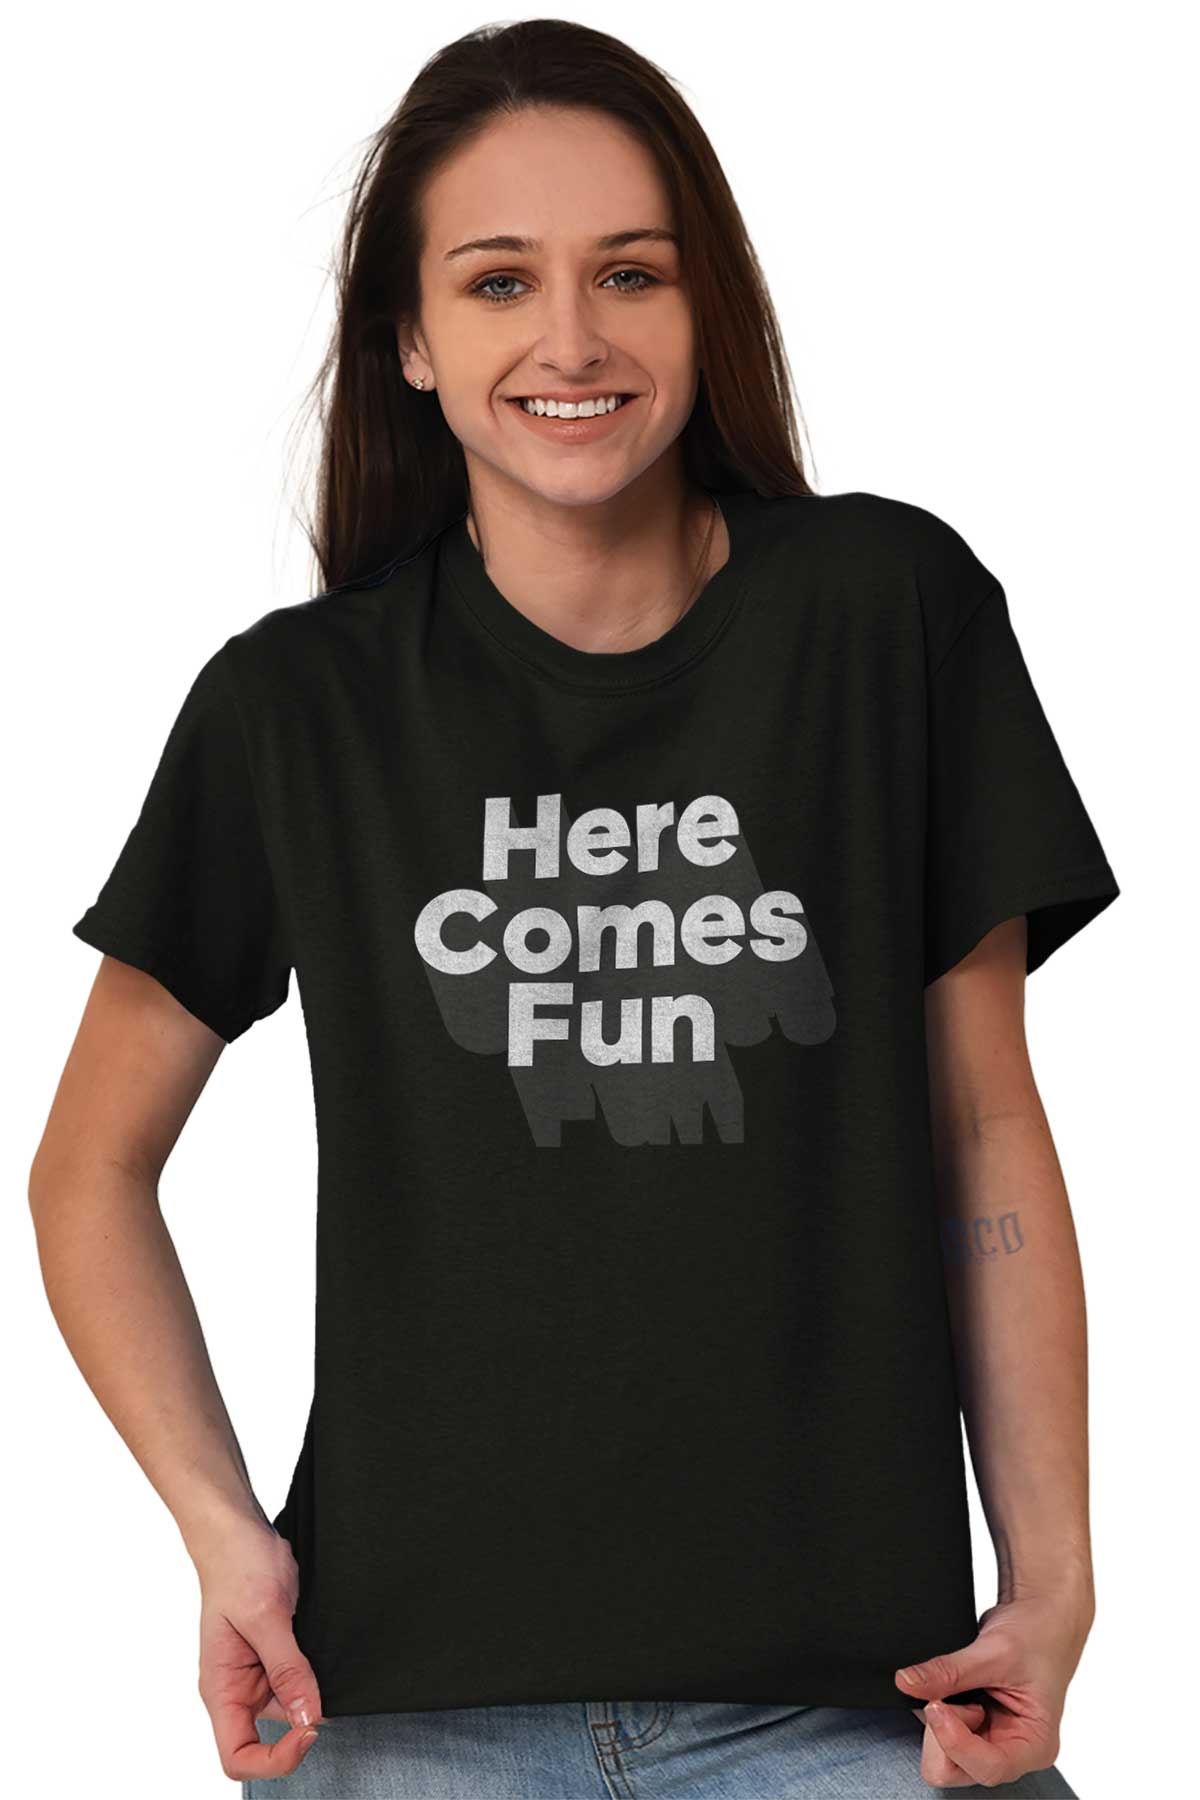 Here Comes The Fun Novelty Graphic Humor T Short Sleeve T Shirt Tees 5155